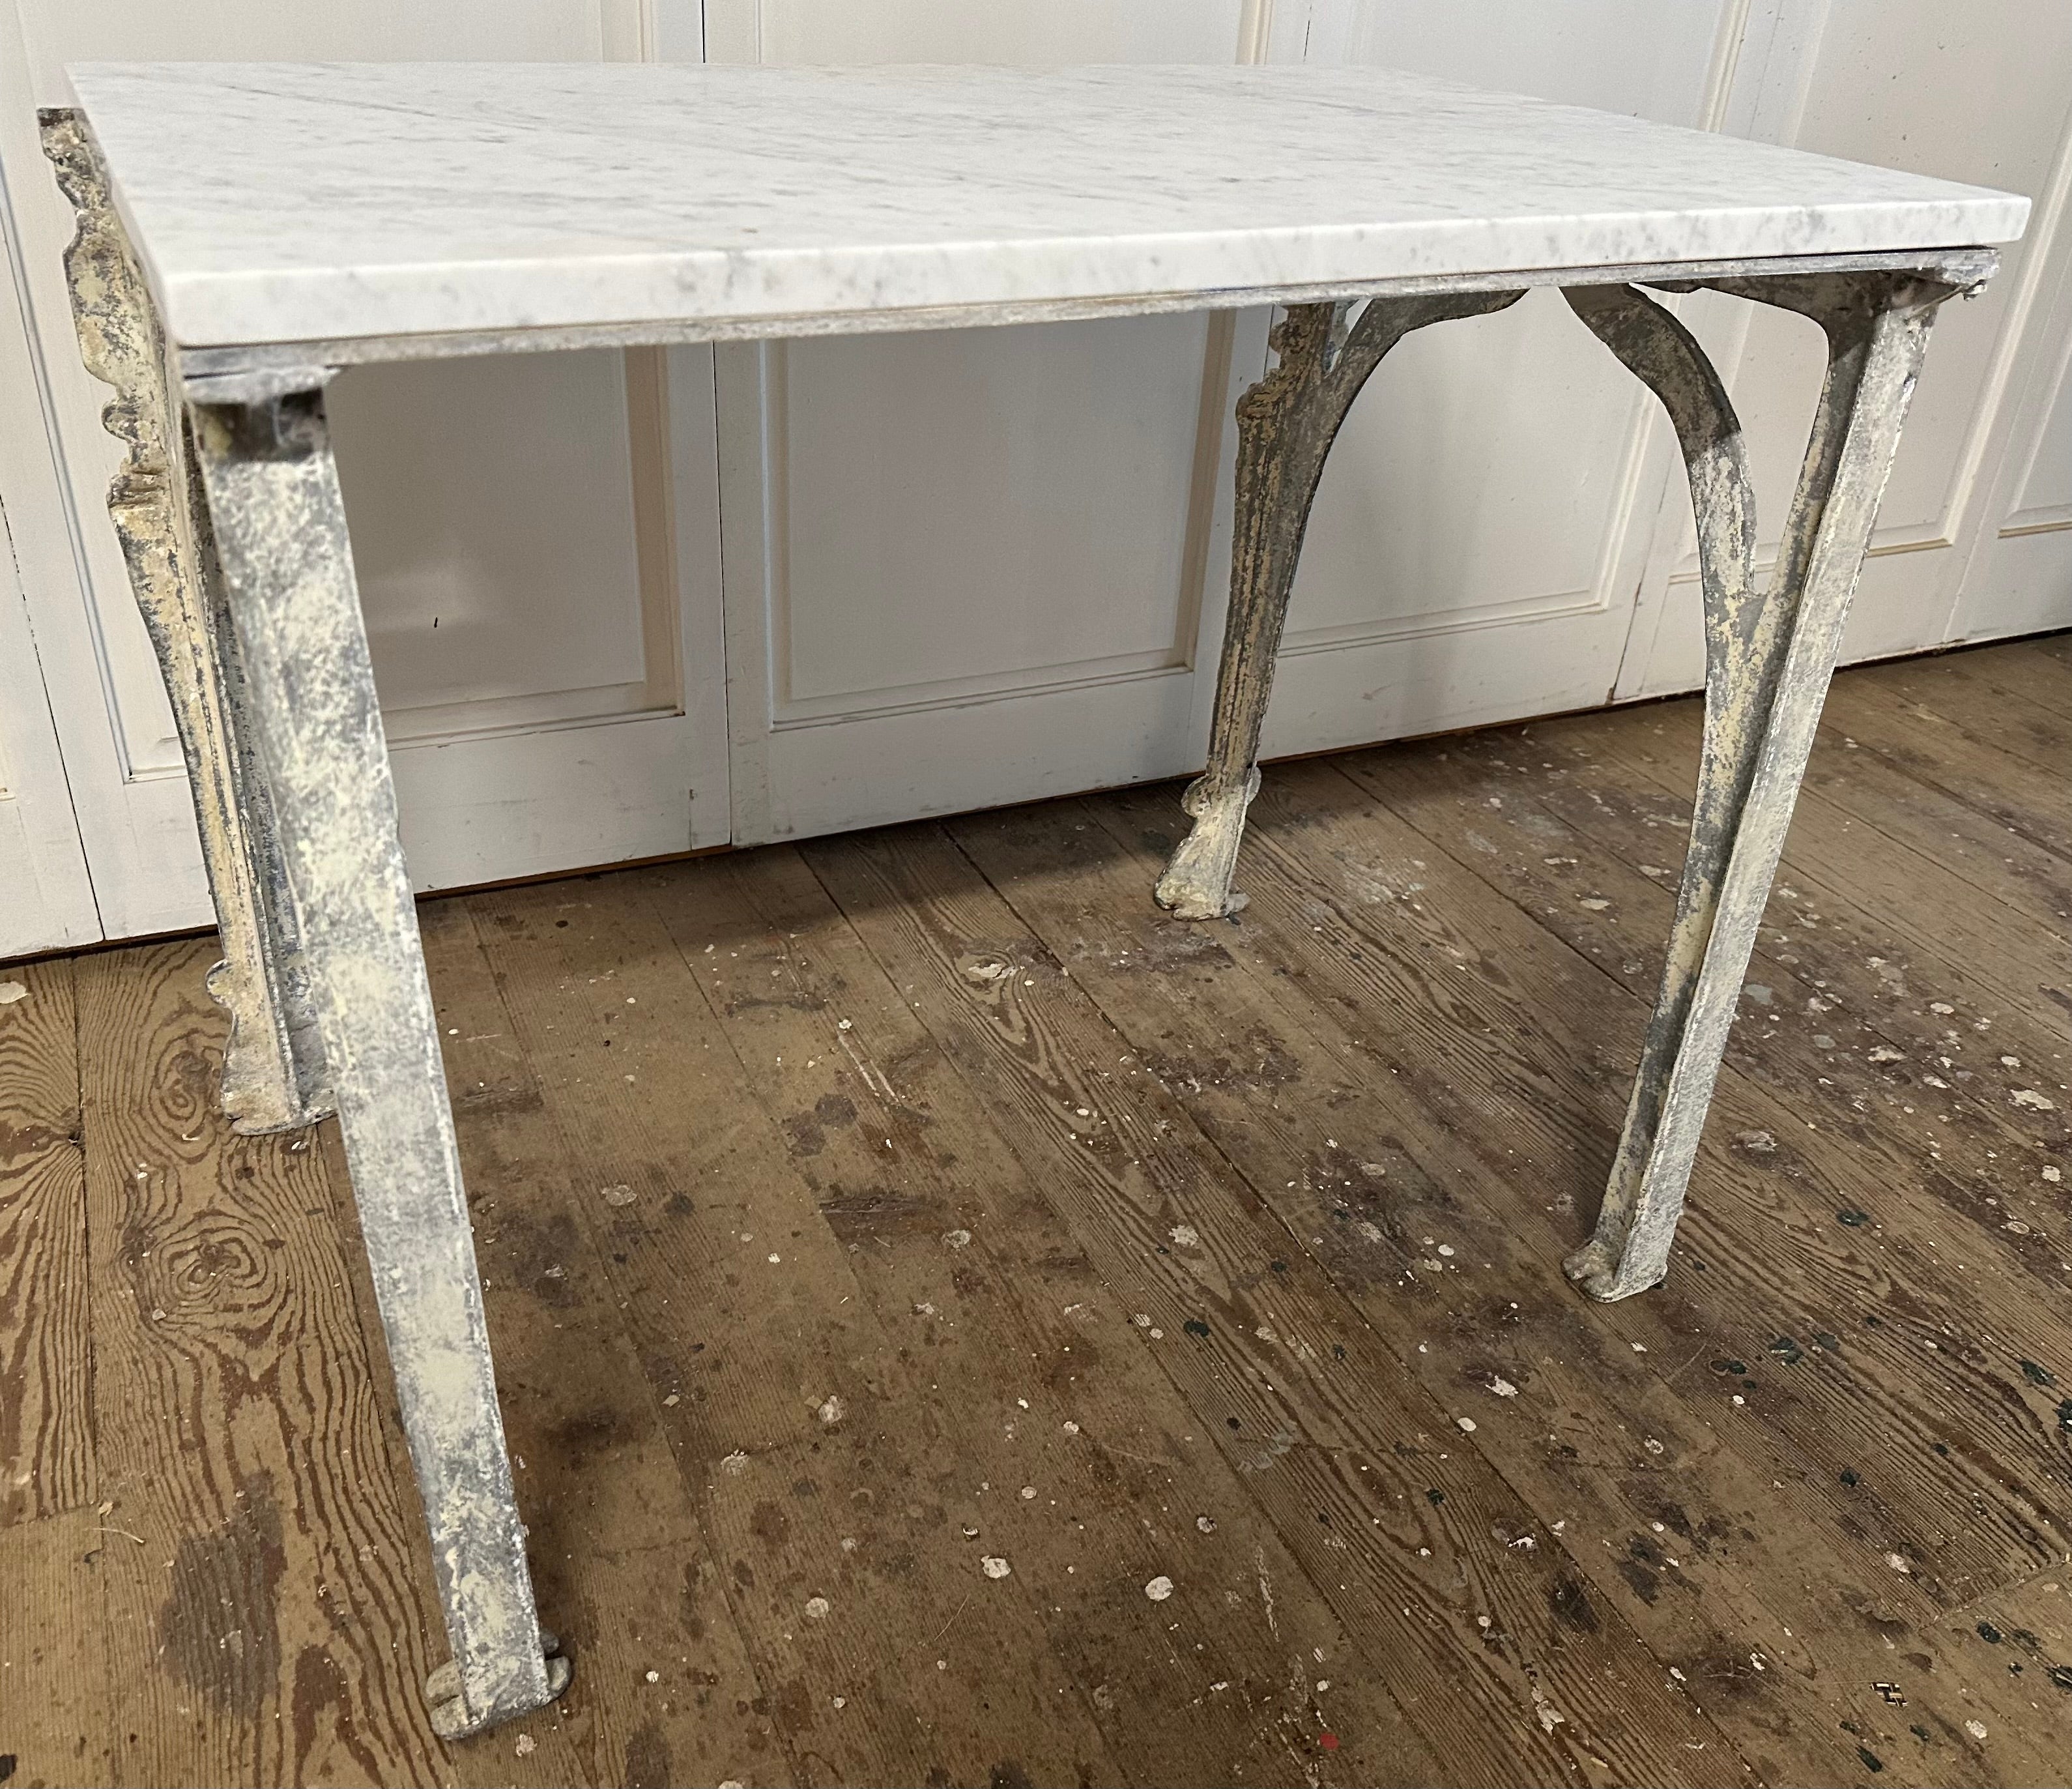 19th Century Continental metal base with fine detailing, distressed painted surface with residue of early paint, topped with white Carrara marble makes this coffee table a fine additional to any situation.
Use this table as a coffee table, side